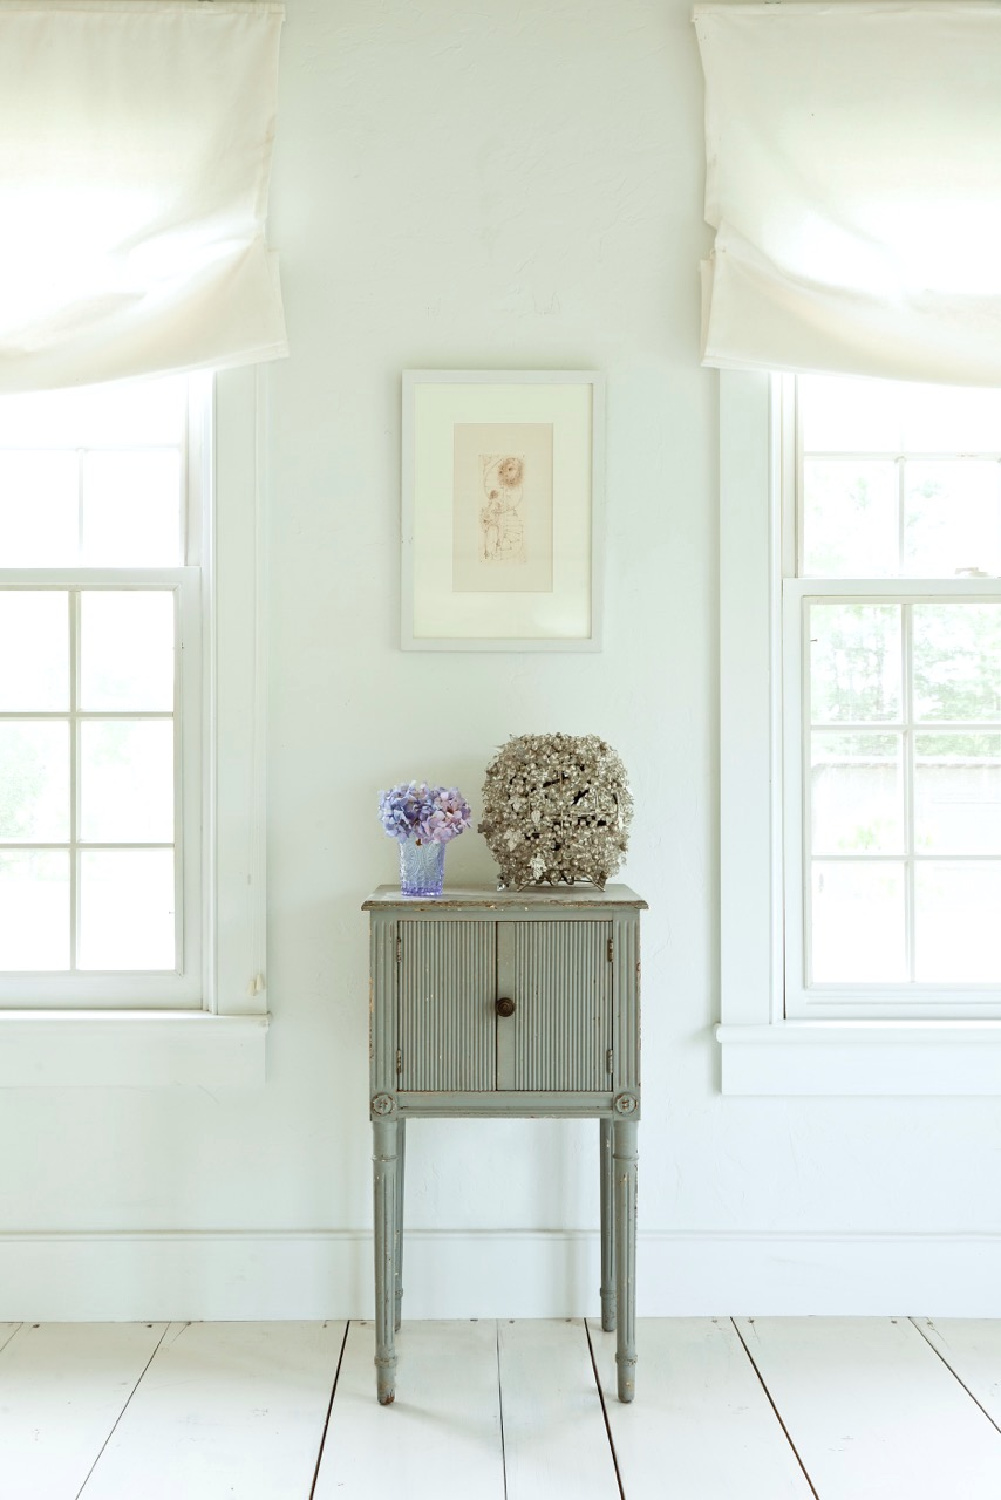 Serene, romantic, ethereal white interior from Fifi O'Neill's SHADES OF WHITE (CICO Books, 2021). #fifioneill #whiteinteriors